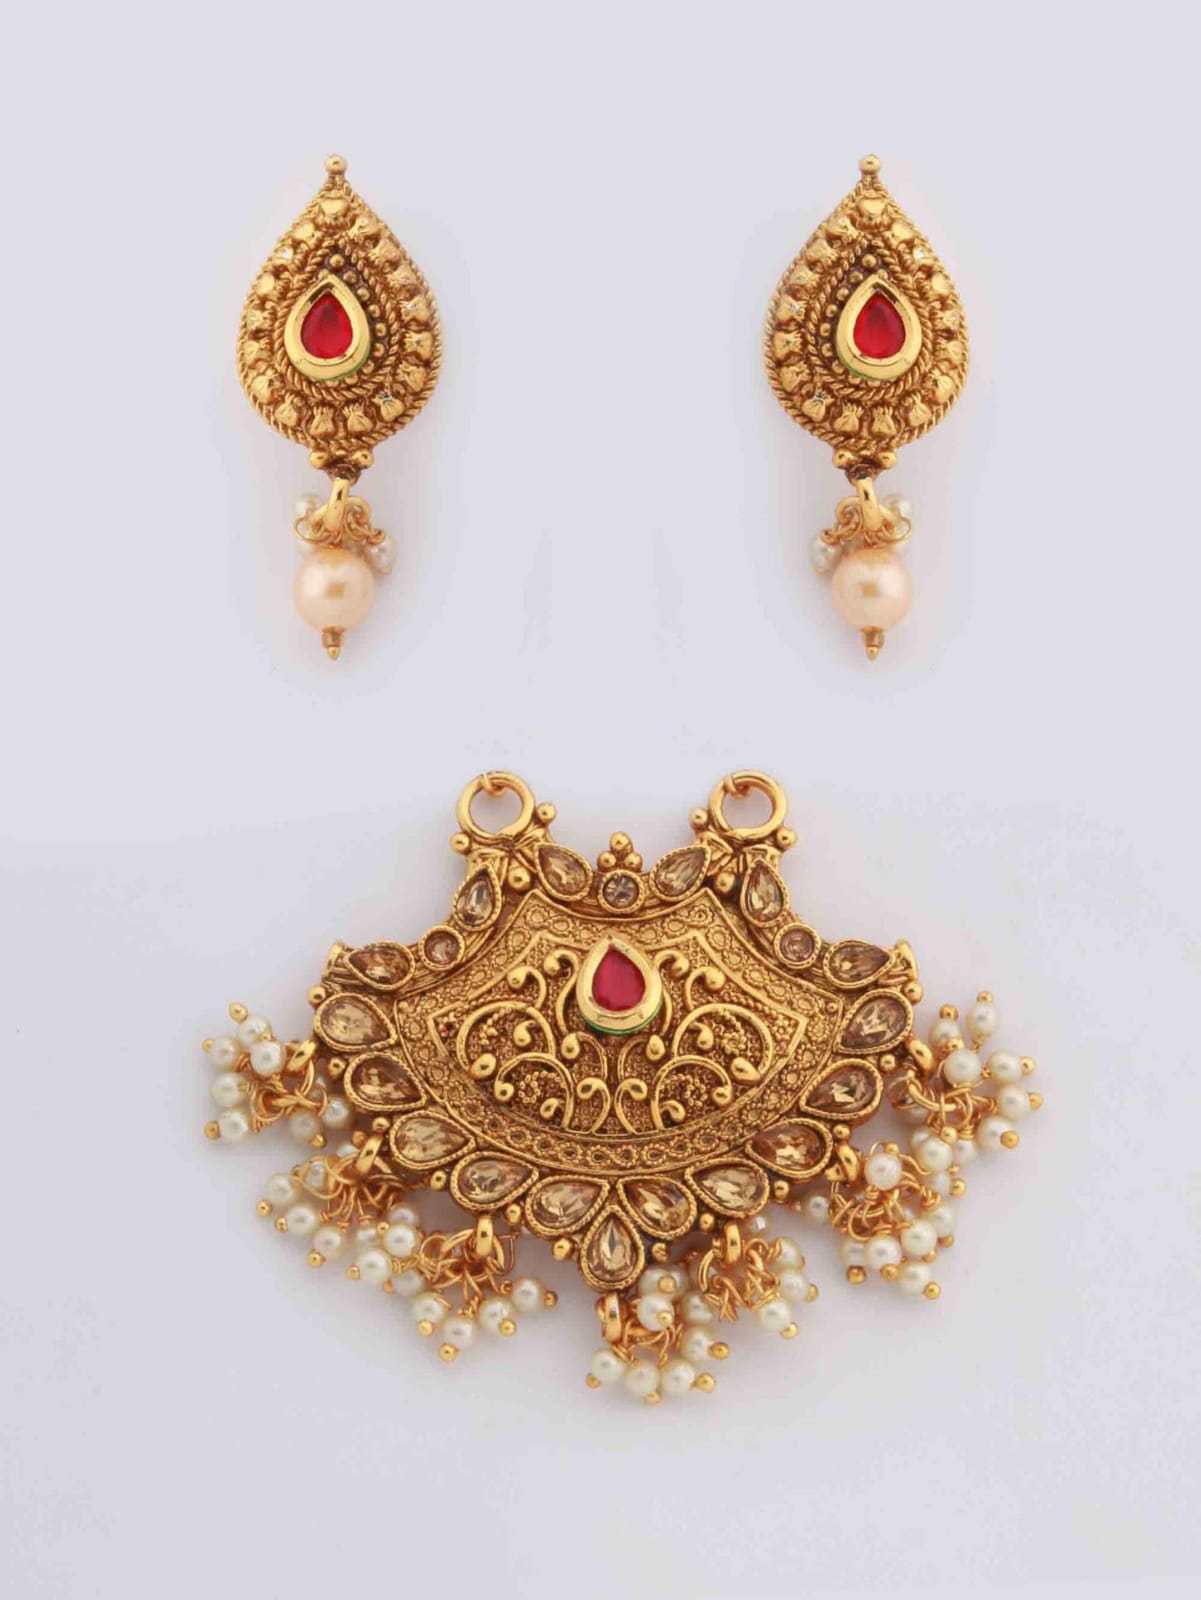 Fancy Traditional Pendant Set with Stud Earrings and Bead Chain for Women and Girls